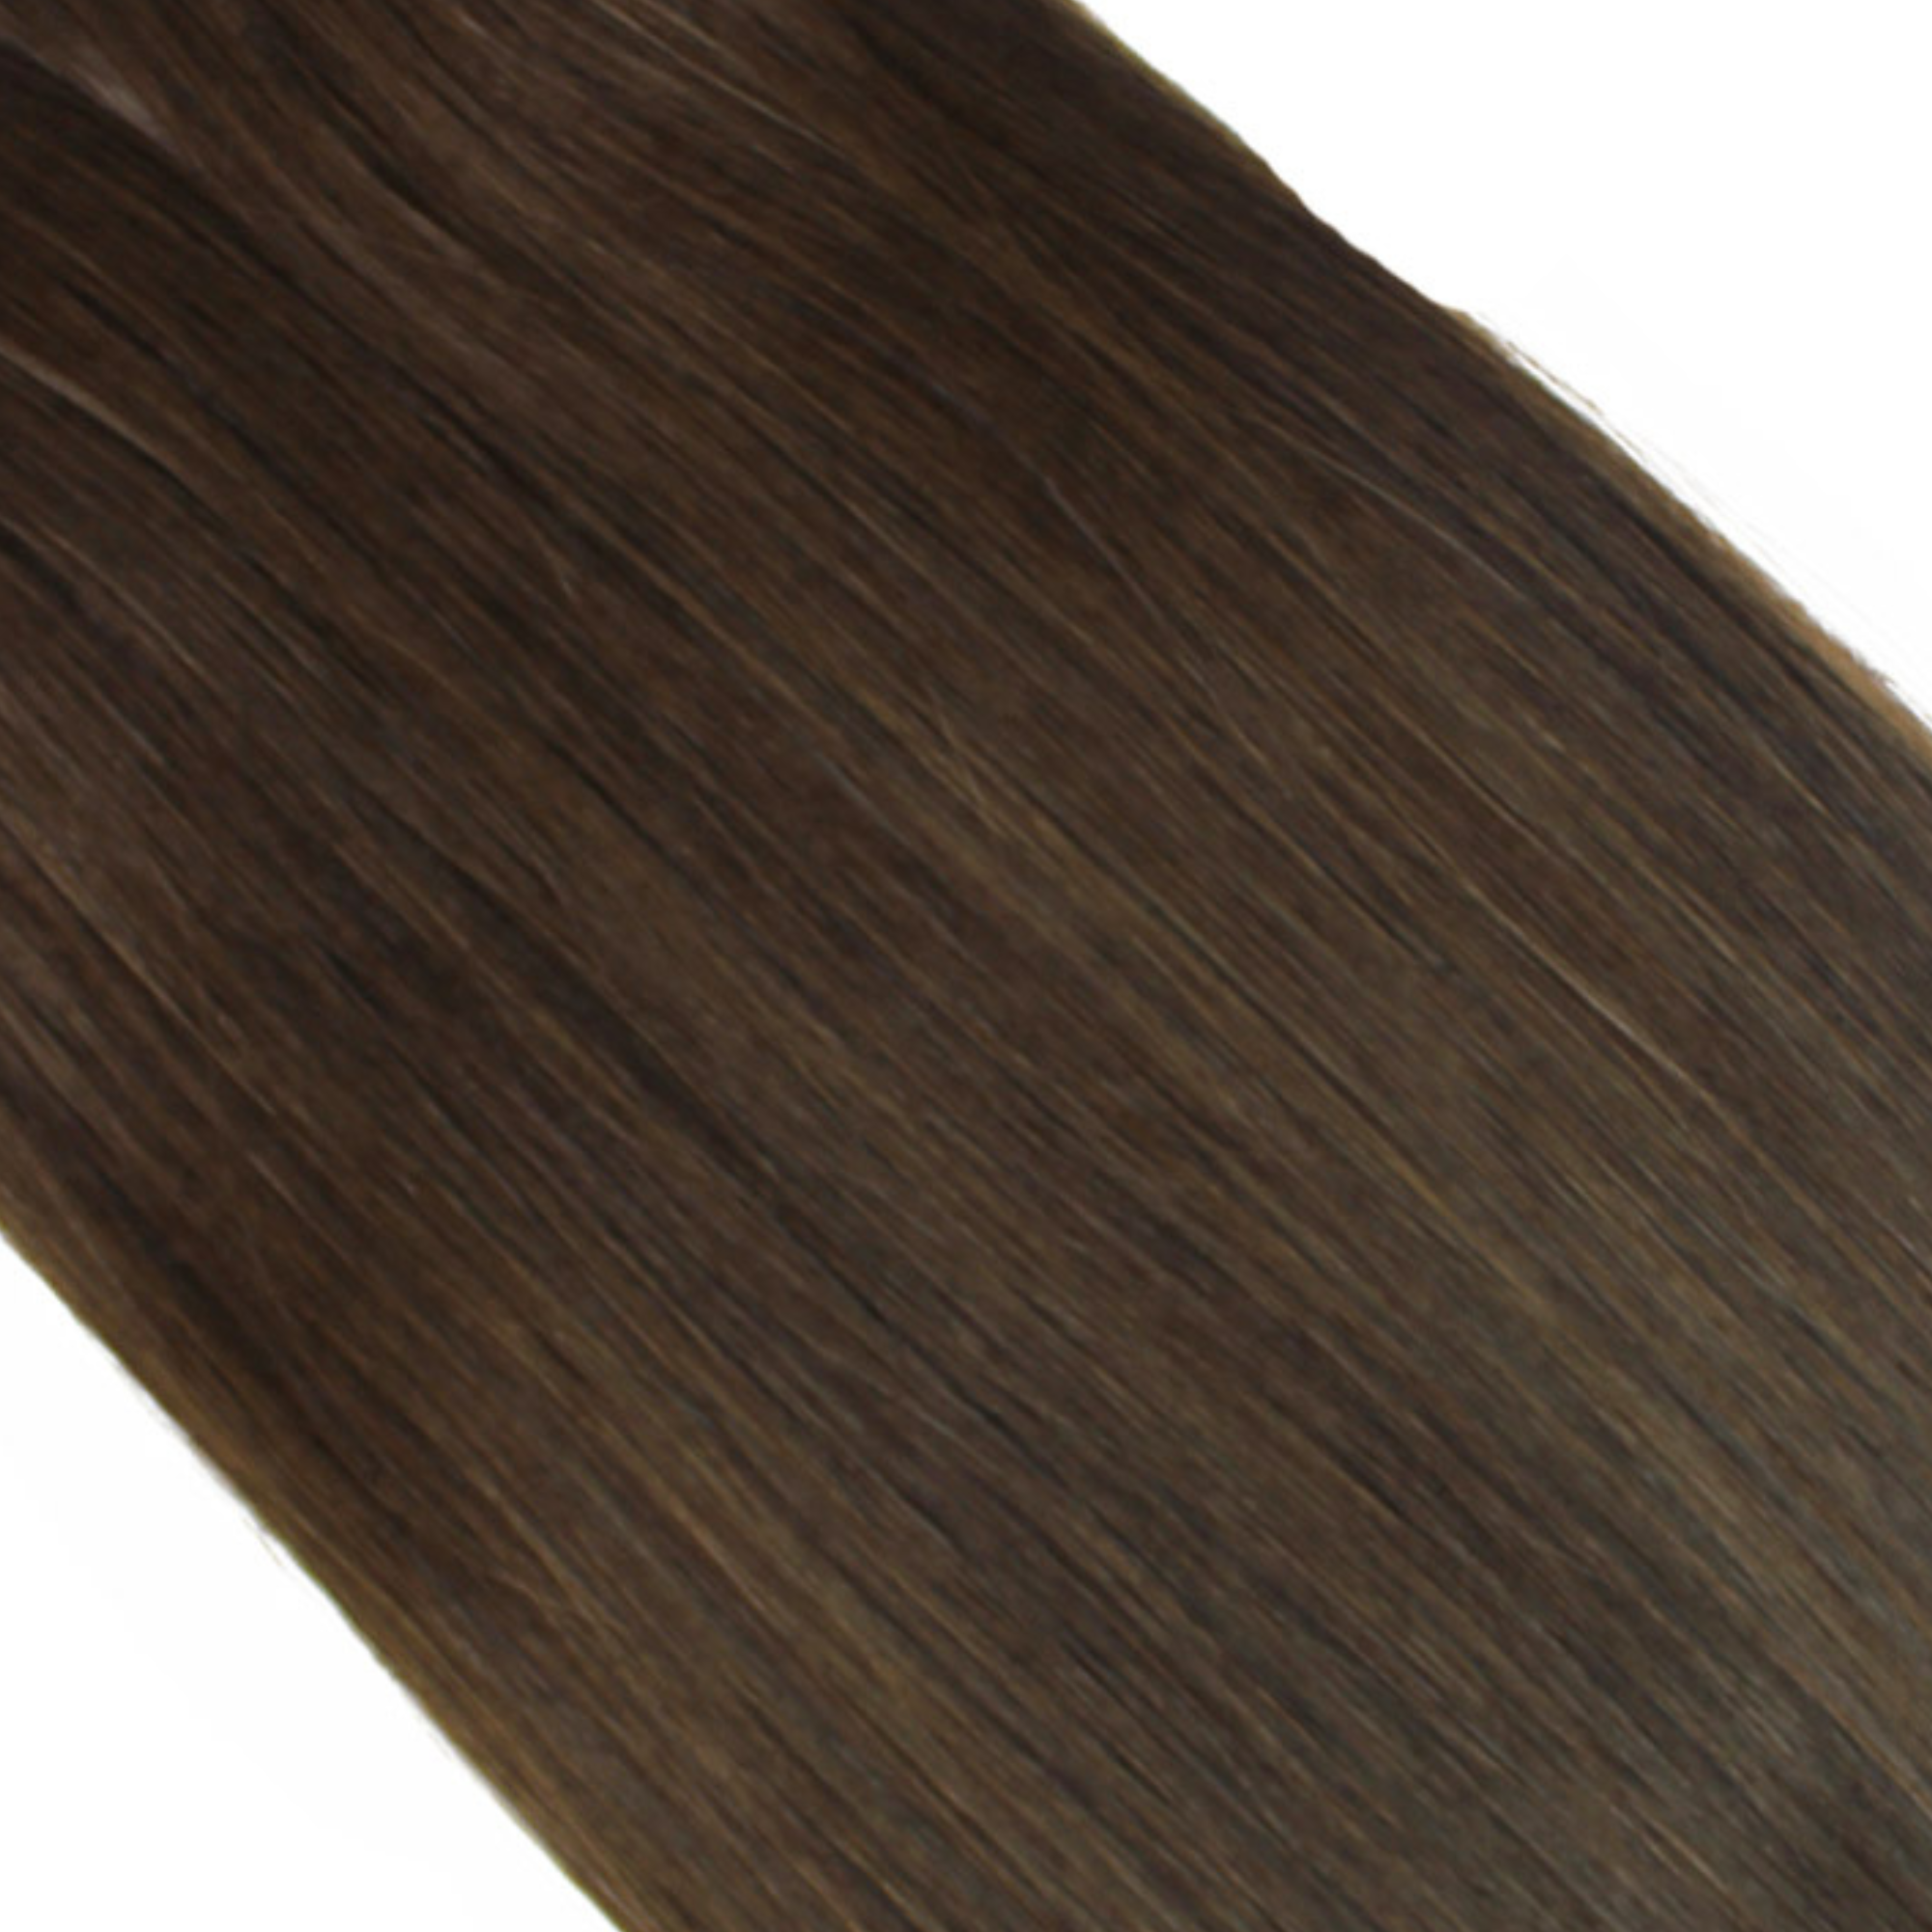 "hair rehab london 14" tape hair extensions shade swatch titled paparazzi perfect"